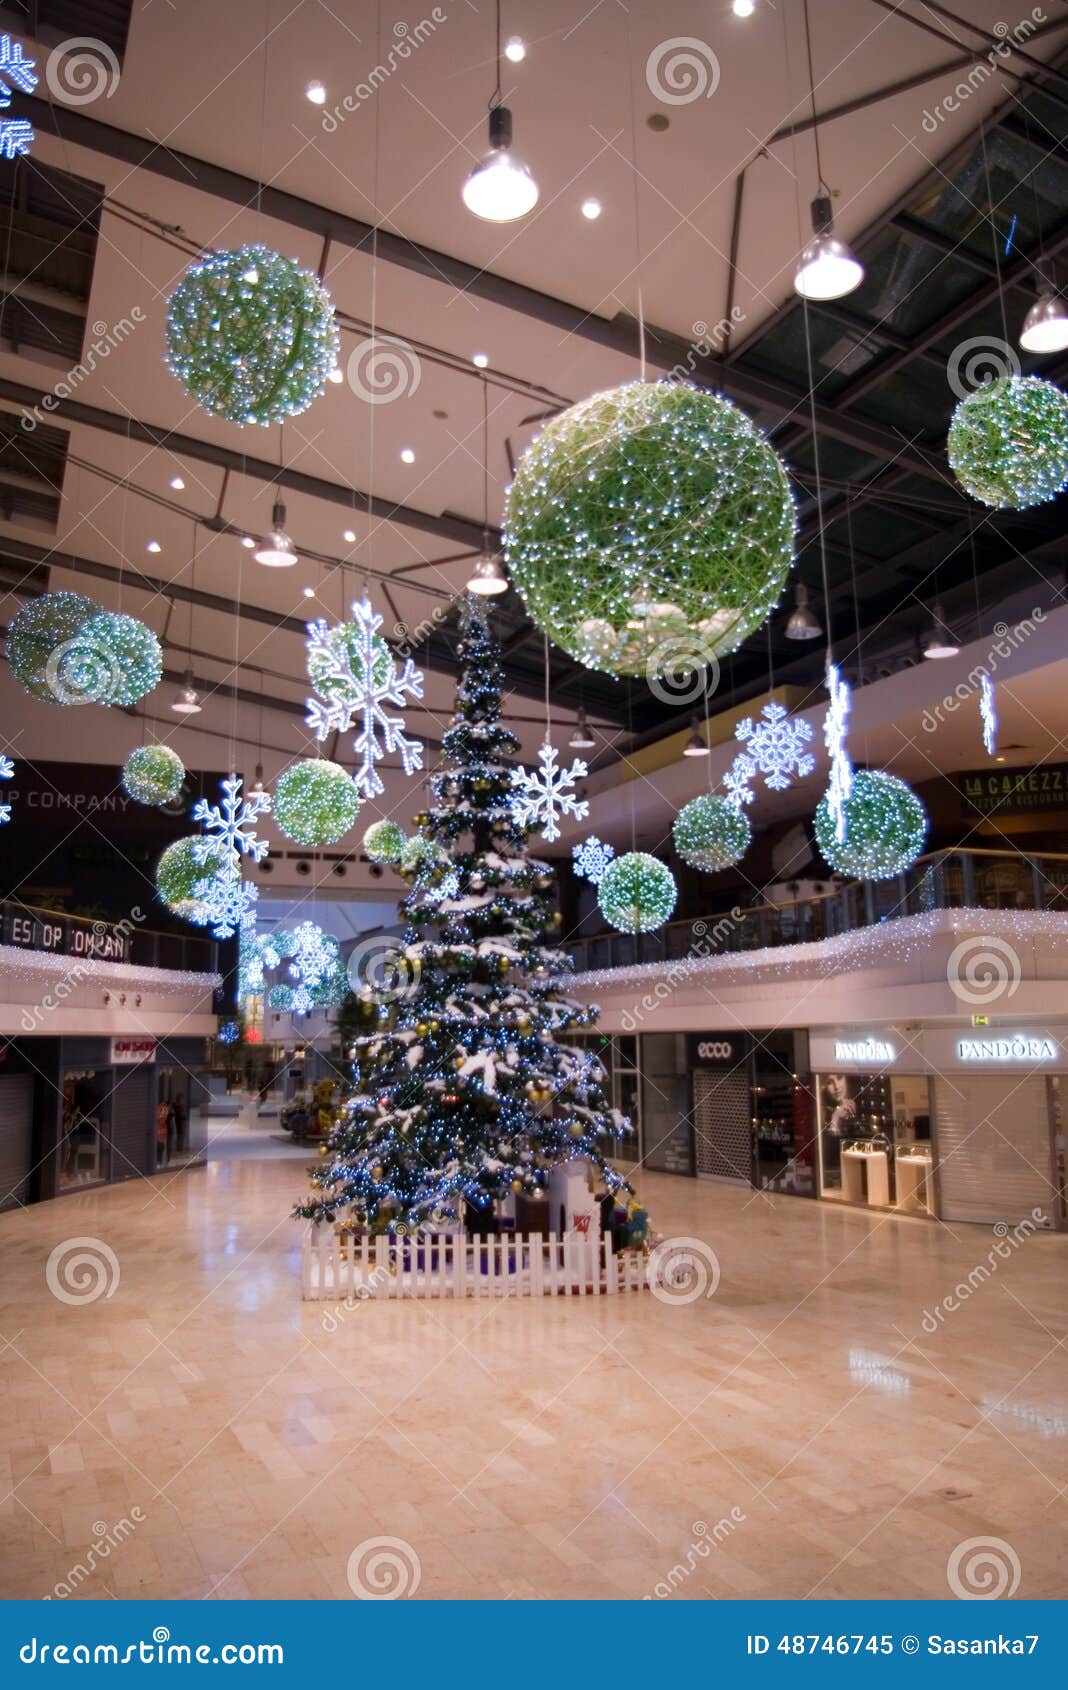 Christmas Decorations at Mall Editorial Image - Image of shopping ...